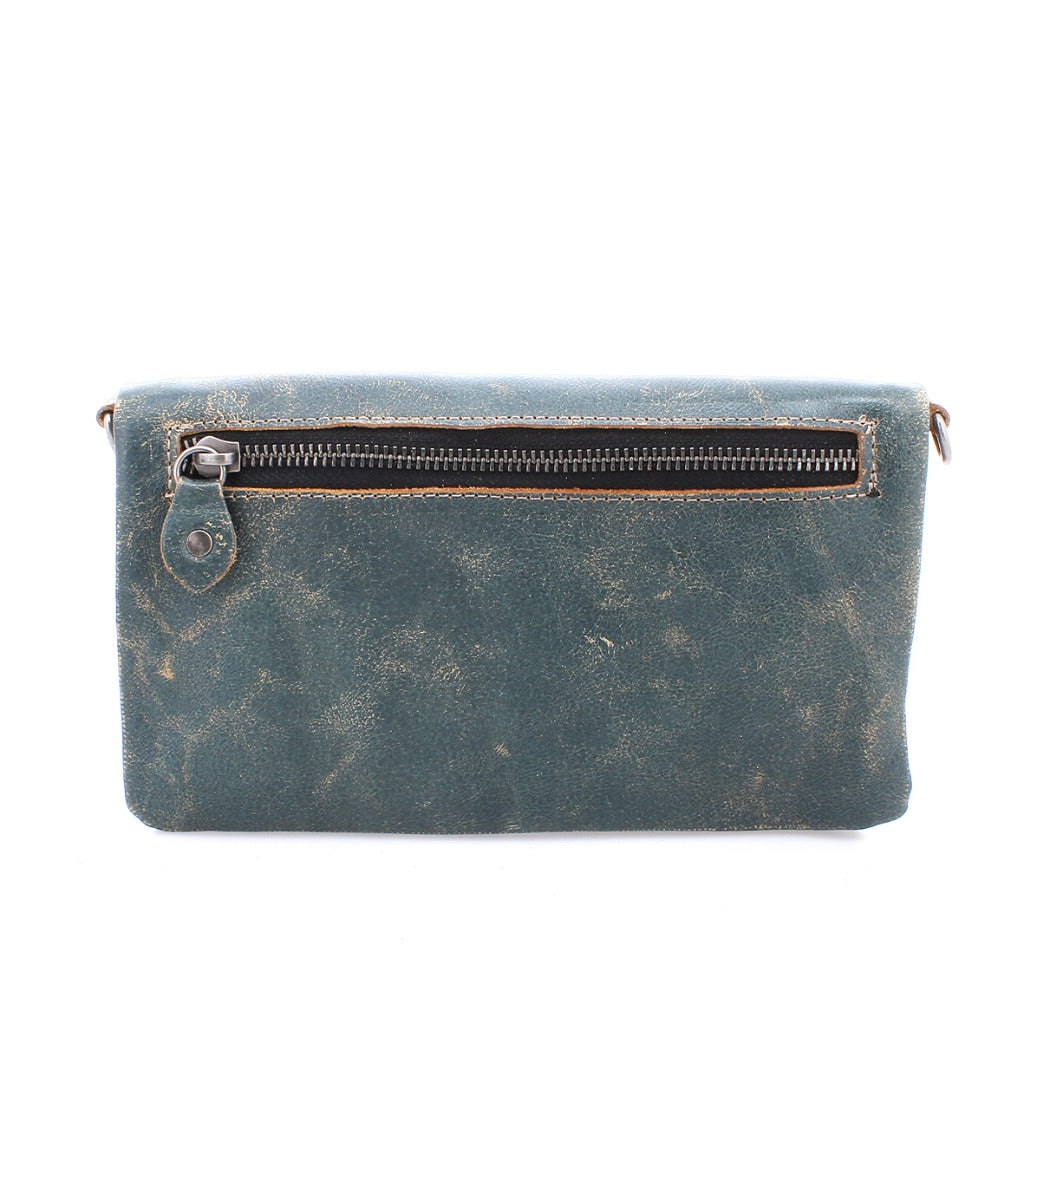 A Cadence by Bed Stu blue leather clutch with a zipper.